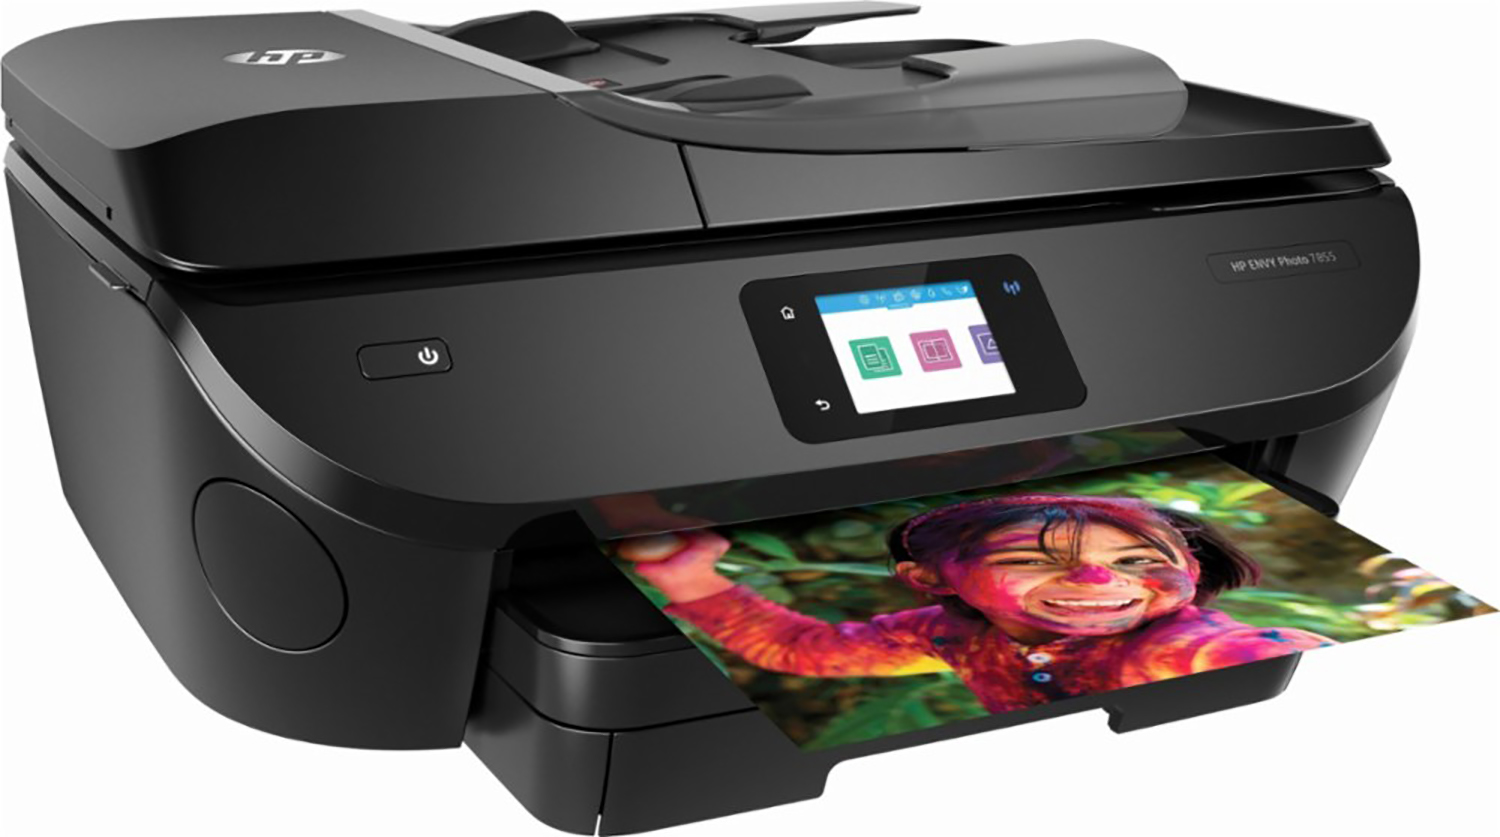 Hp Envy 7855 Printer Review Versatile Document And Photo Printing At Home Toms Guide 7294